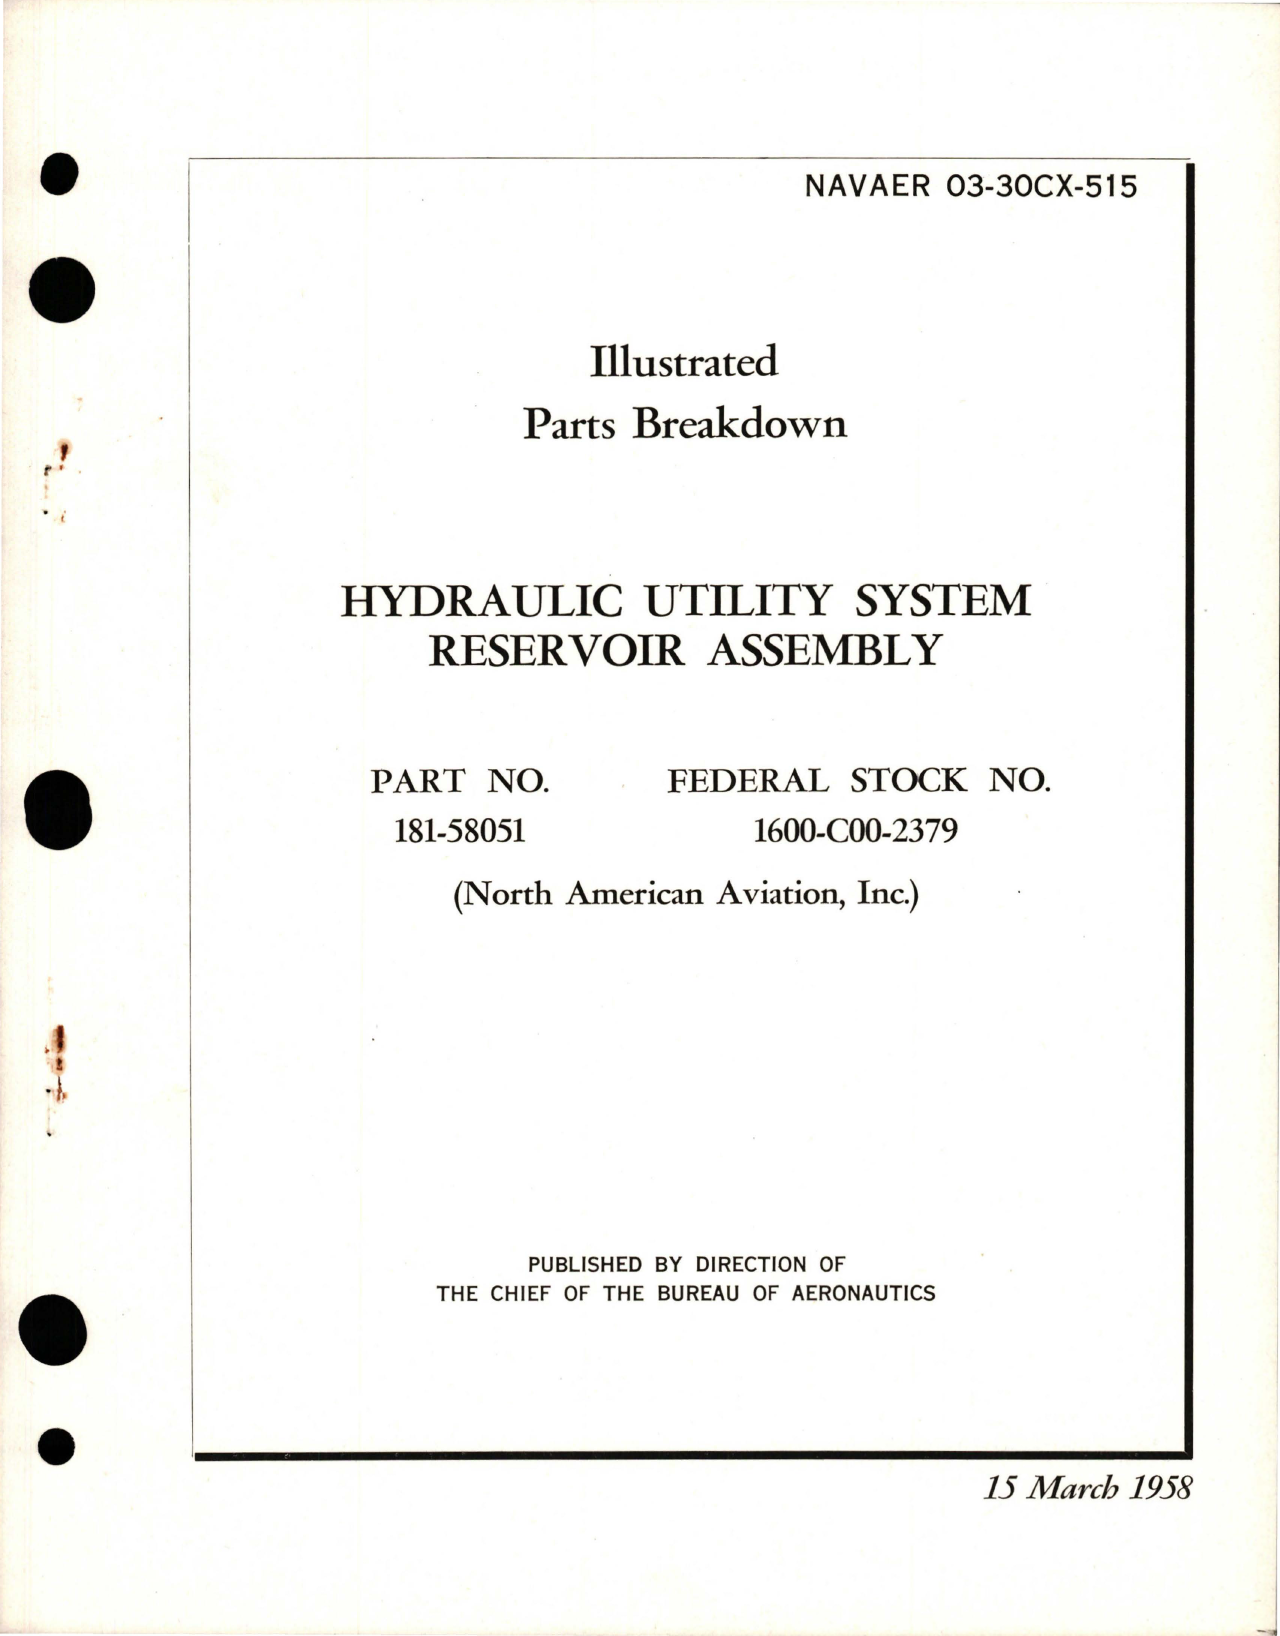 Sample page 1 from AirCorps Library document: Illustrated Parts Breakdown for Hydraulic Utility System Reservoir Assembly - Part 181-58051